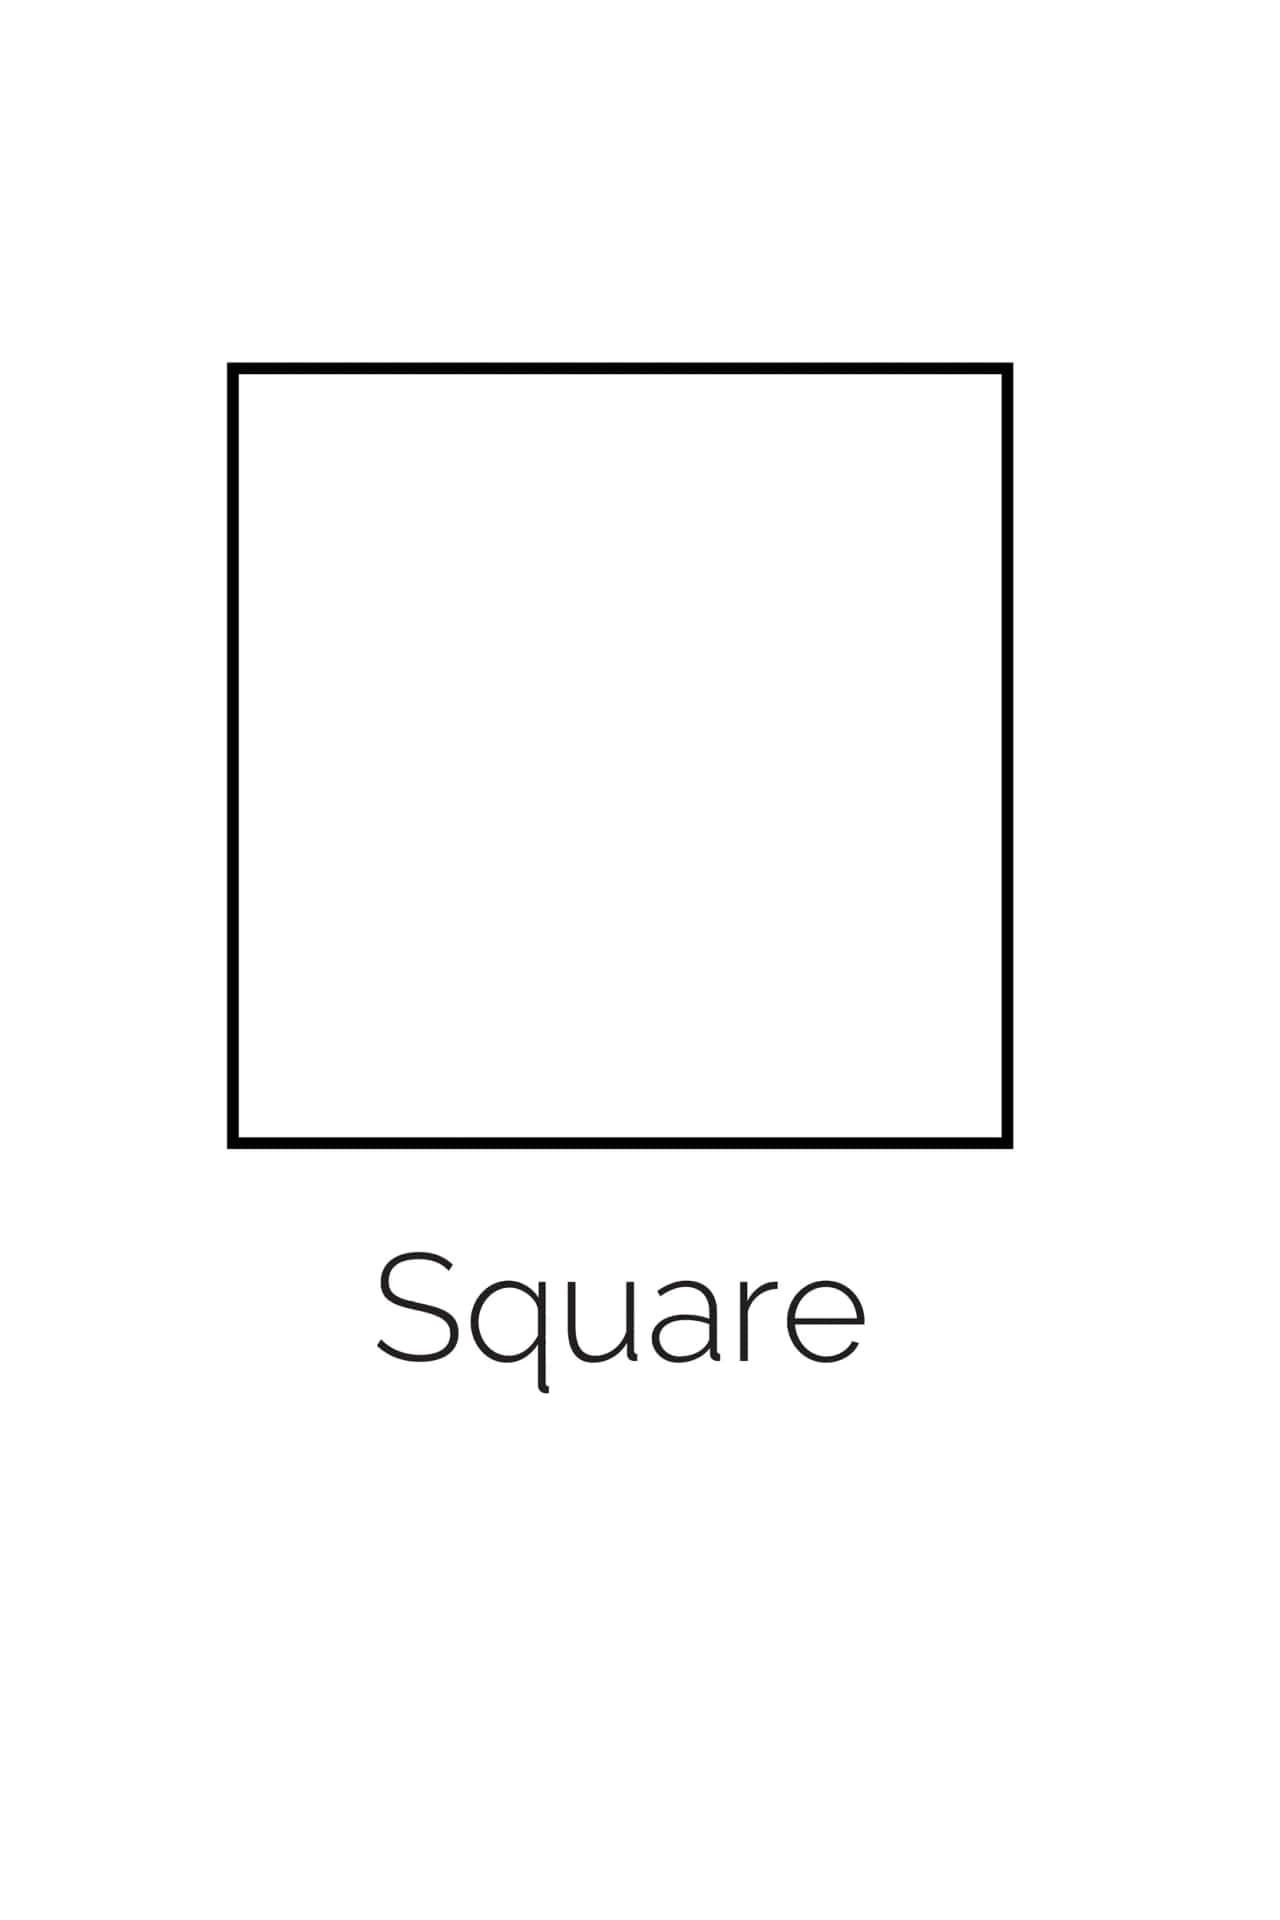 Squares Coloring Pages